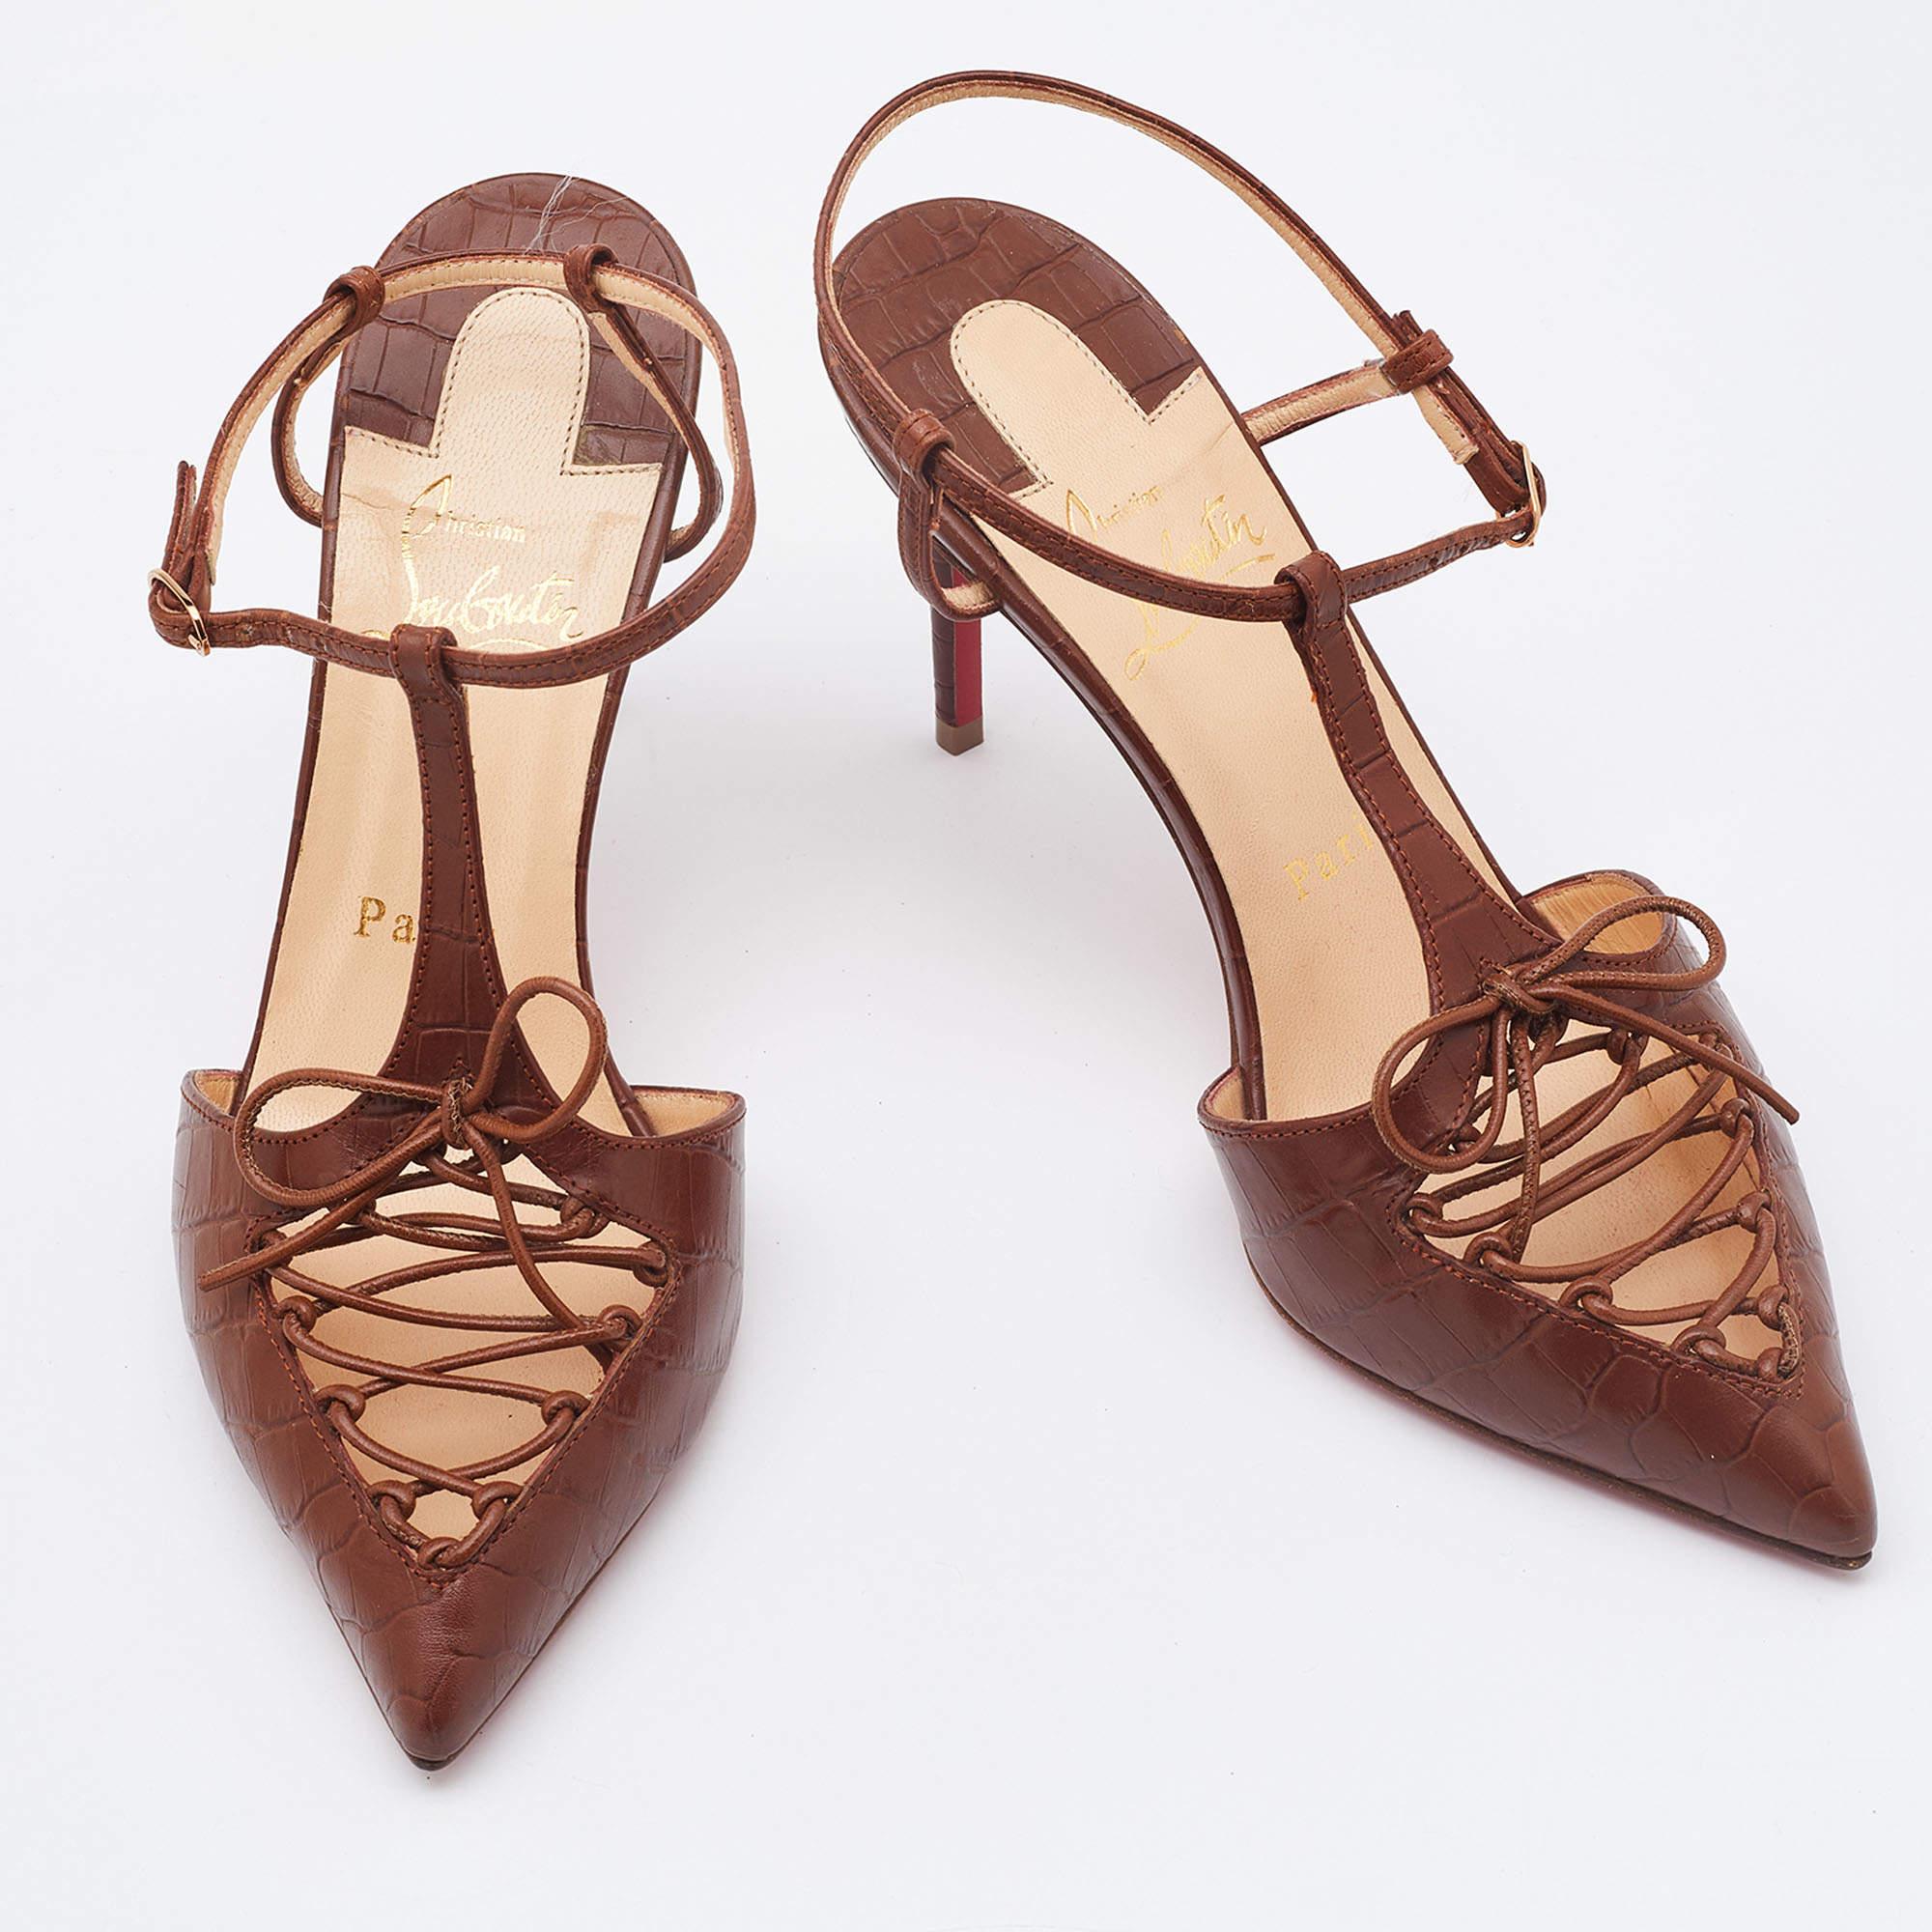 Make an elegant style statement with these classic ankle-strap pumps from Christian Louboutin. The croc-embossed leather pair flaunts a simple yet chic design and is finished neatly with buckle closures and comfortable leather